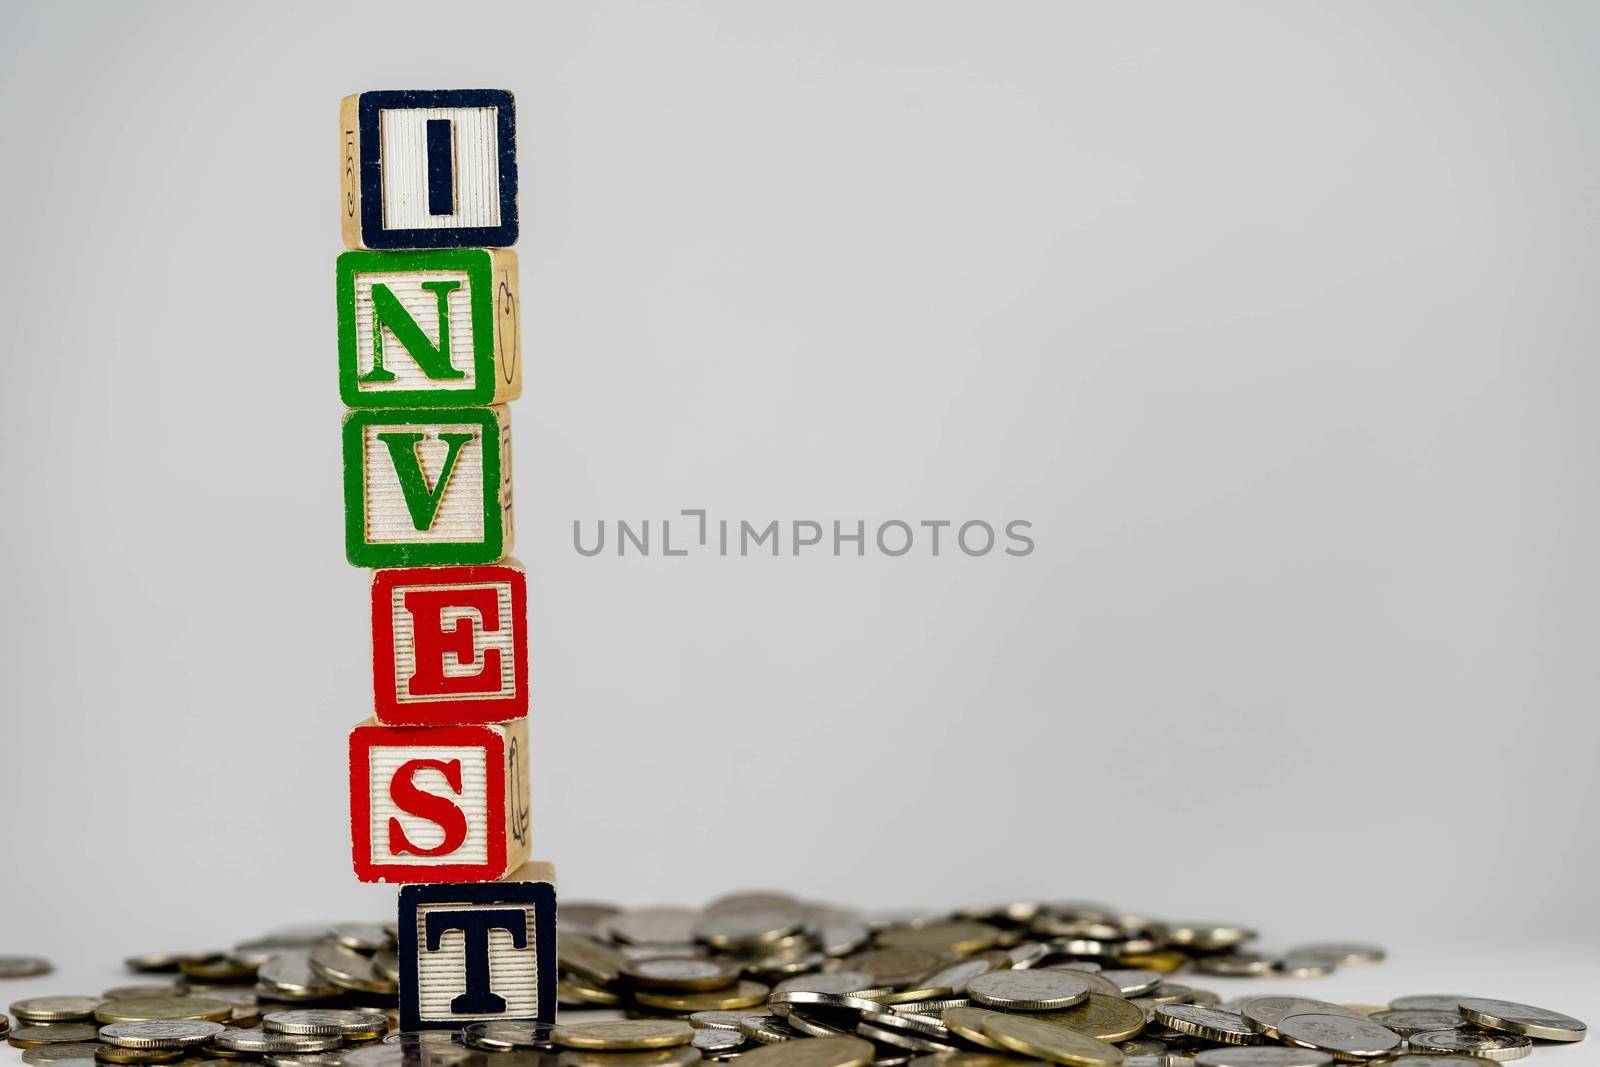 Investment concept with wooden blocks and coins. Invest letters on wooden blocks sorrounded with money